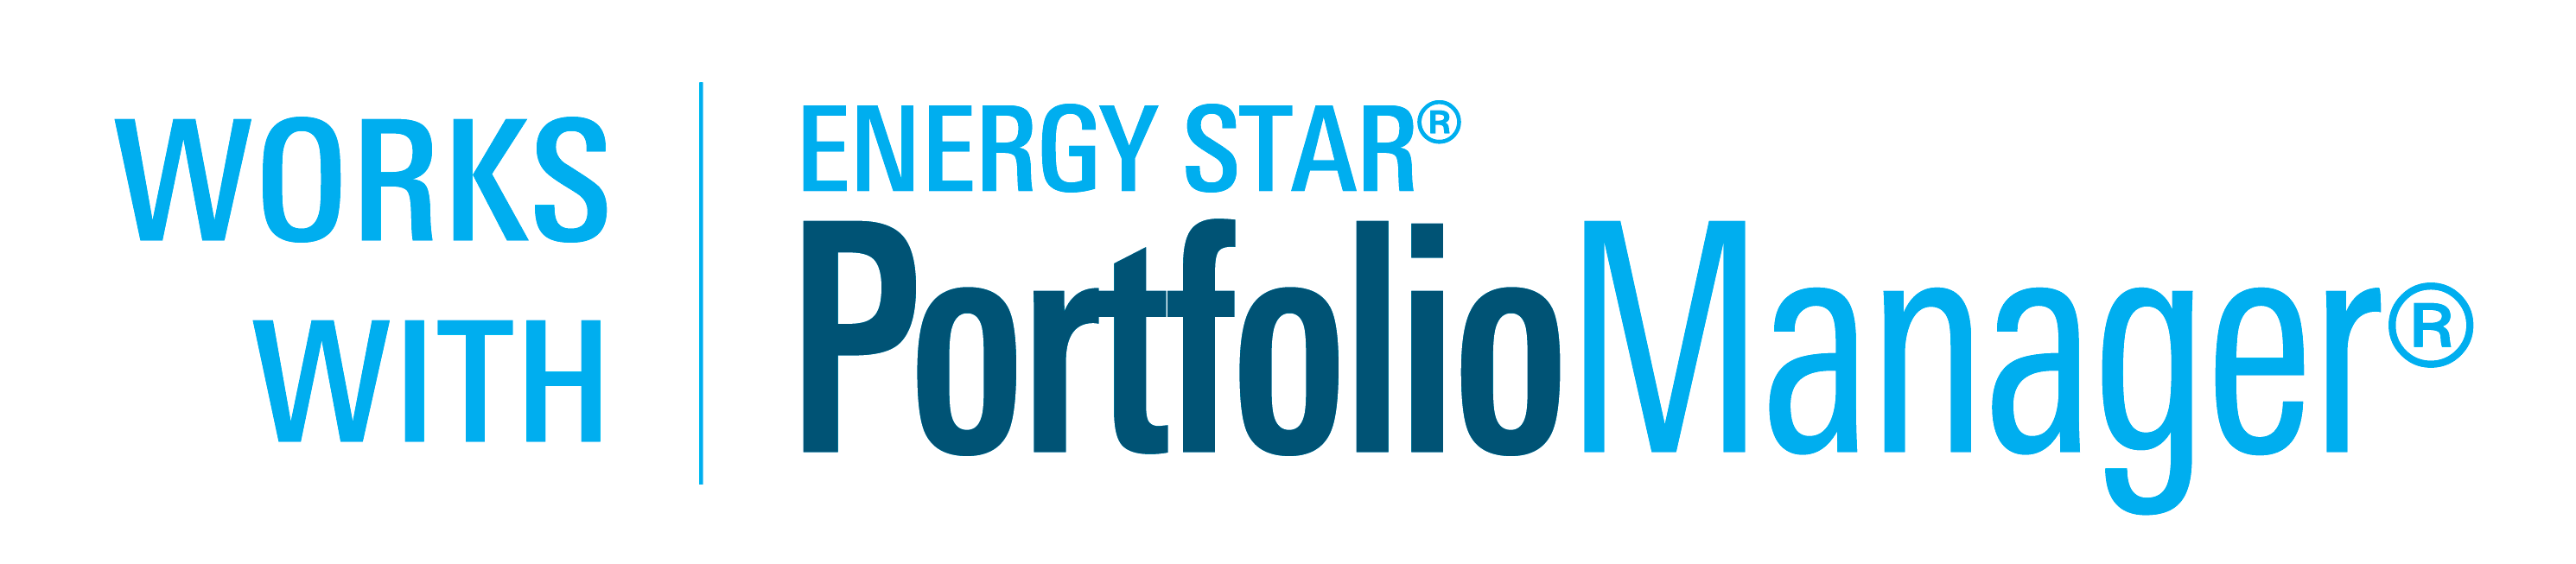 Works with ENERGY Star Portfolio Manager